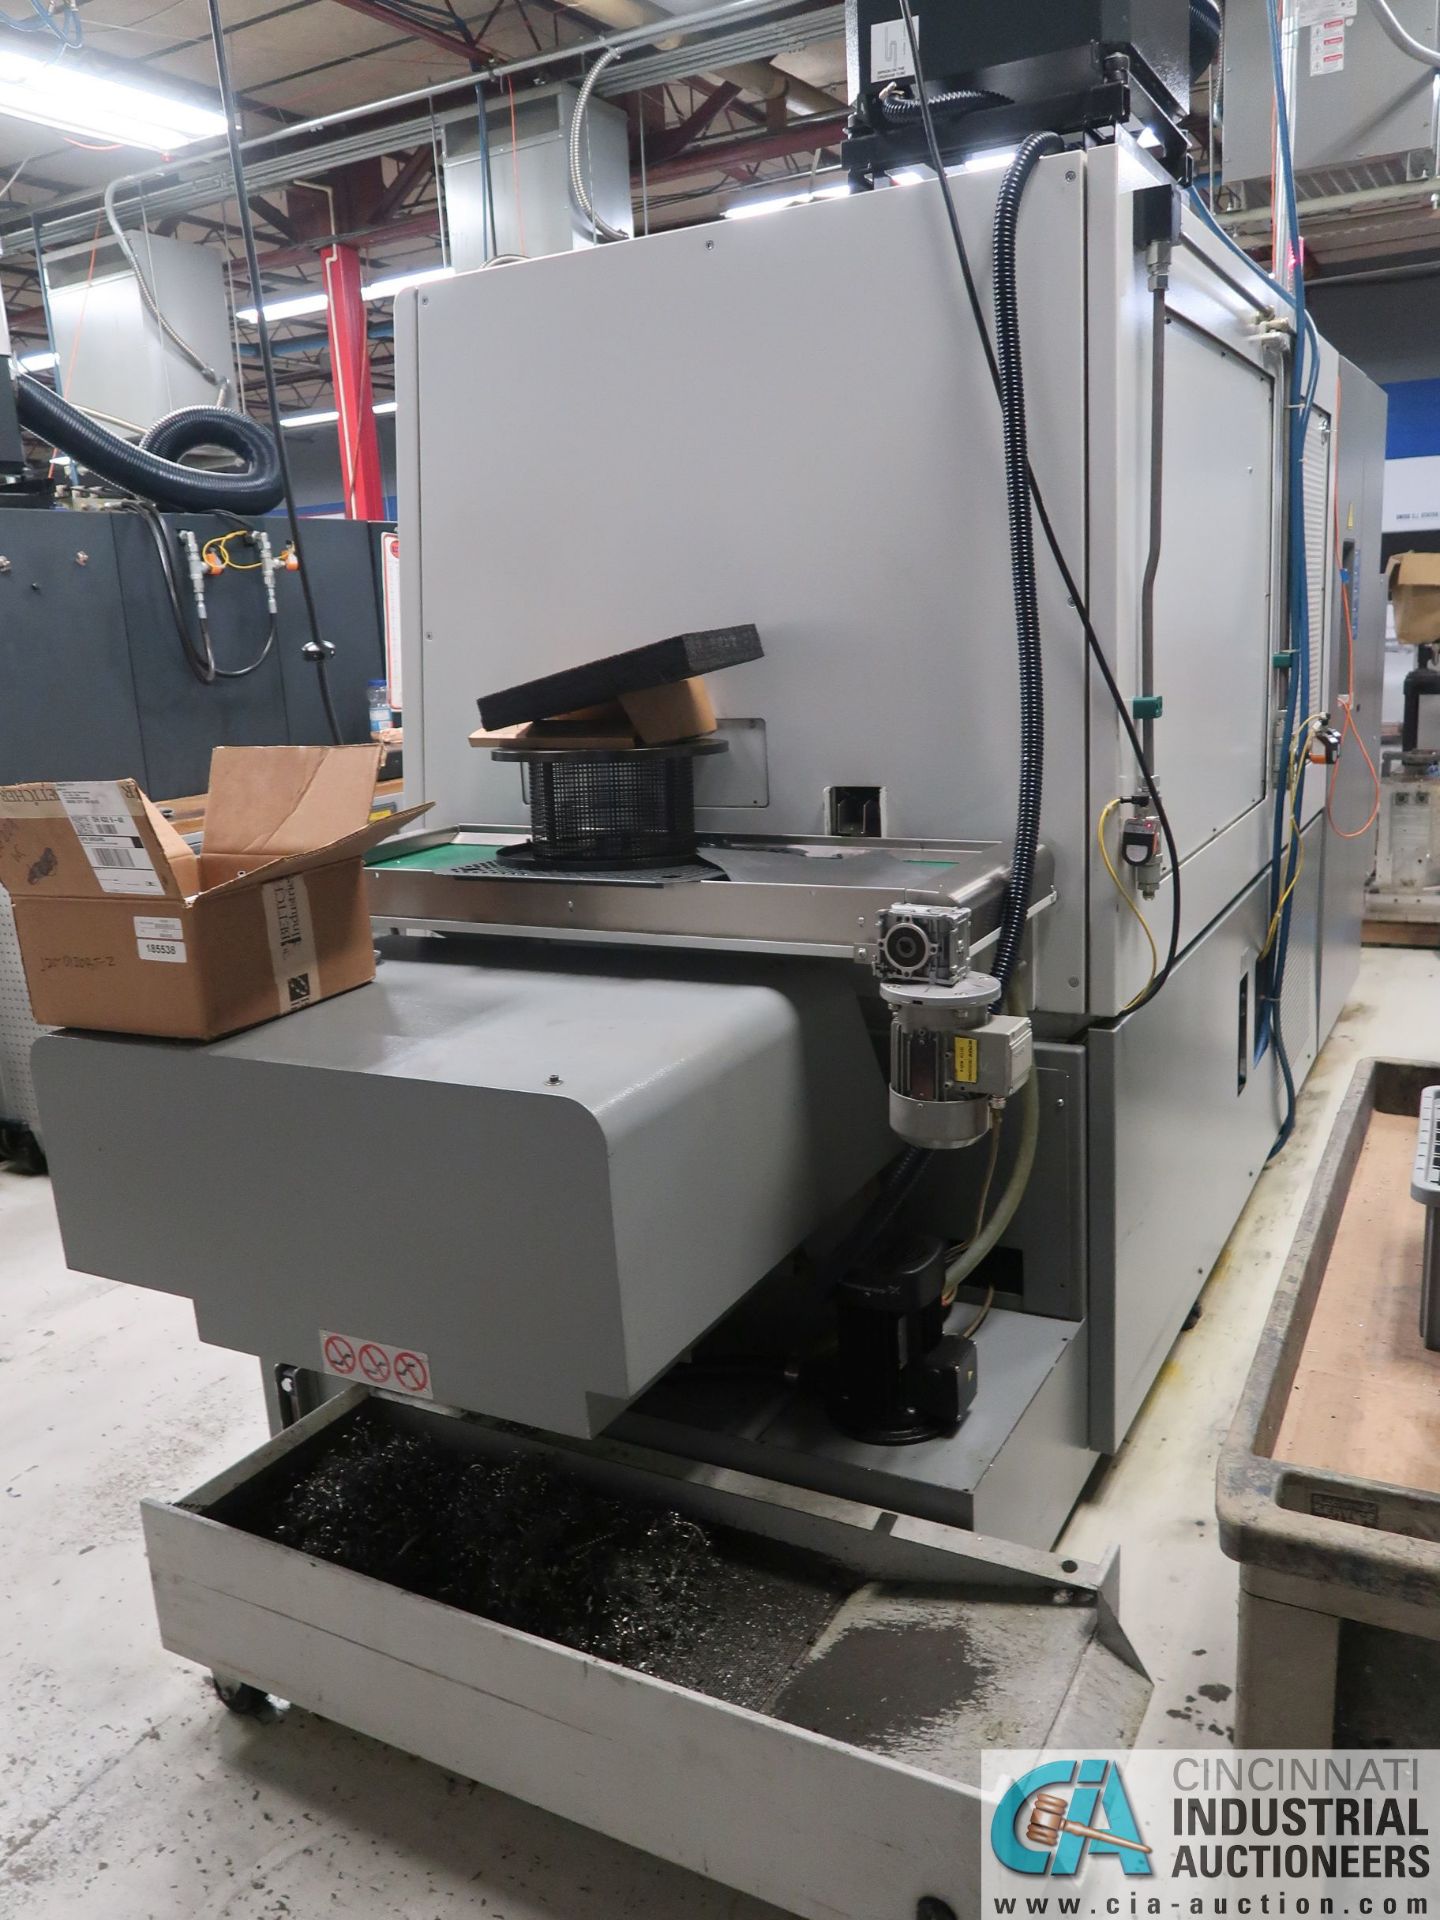 DMG GILDEMEISTER MODEL SPEED 20-11 LINEAR 11-AXIS SWISS CNC TURNING CENTER; S/N 8085012057B, FANUC - Image 24 of 27